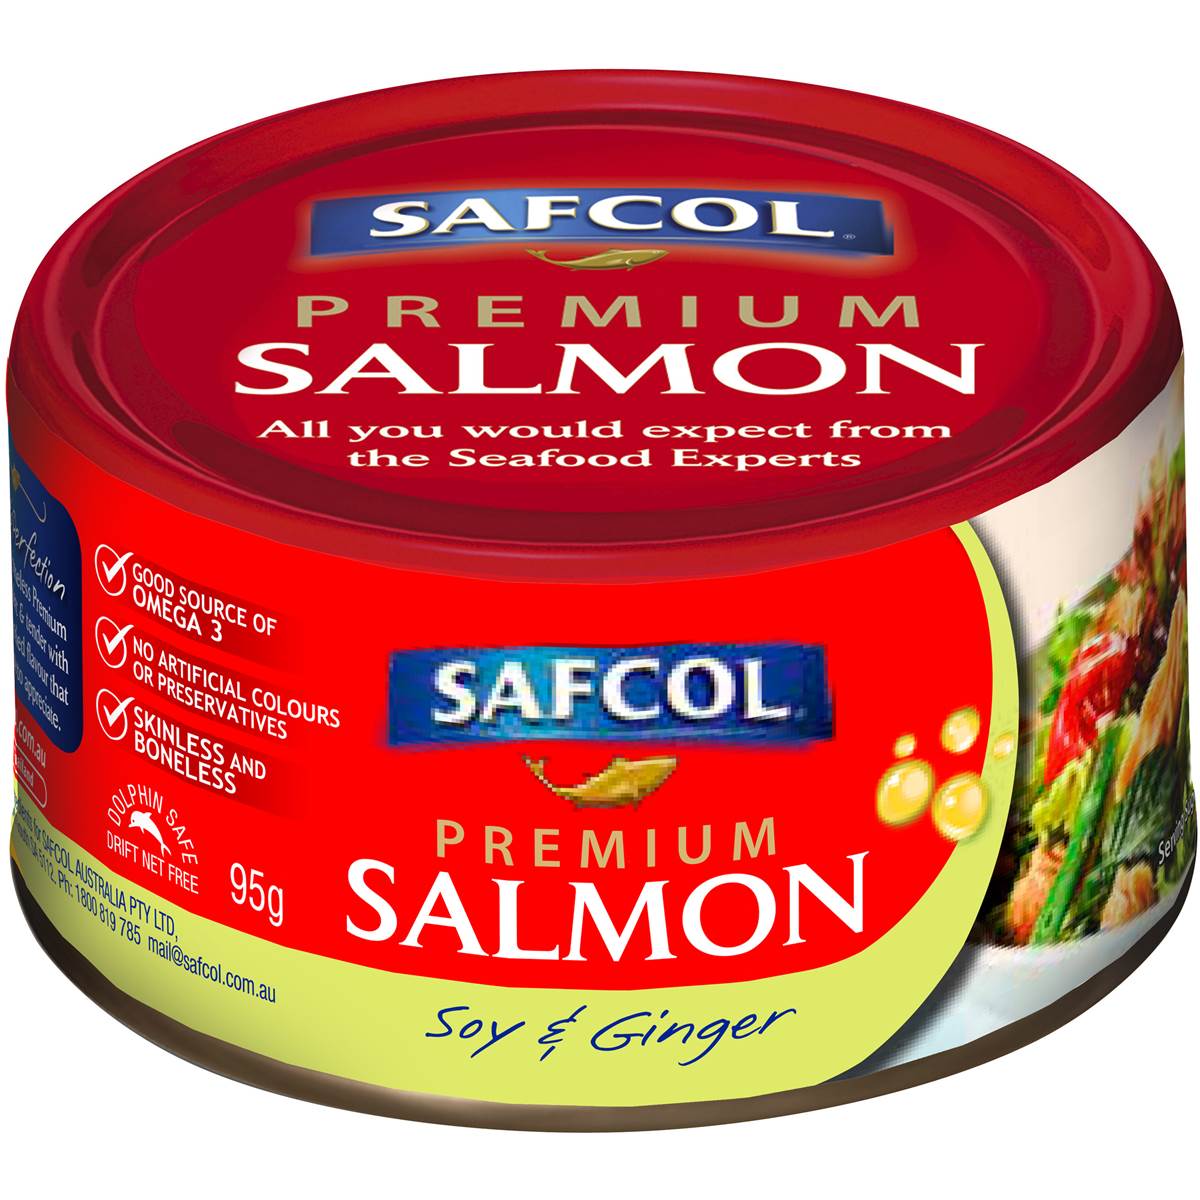 Calories in Safcol Premium Salmon Soy & Ginger